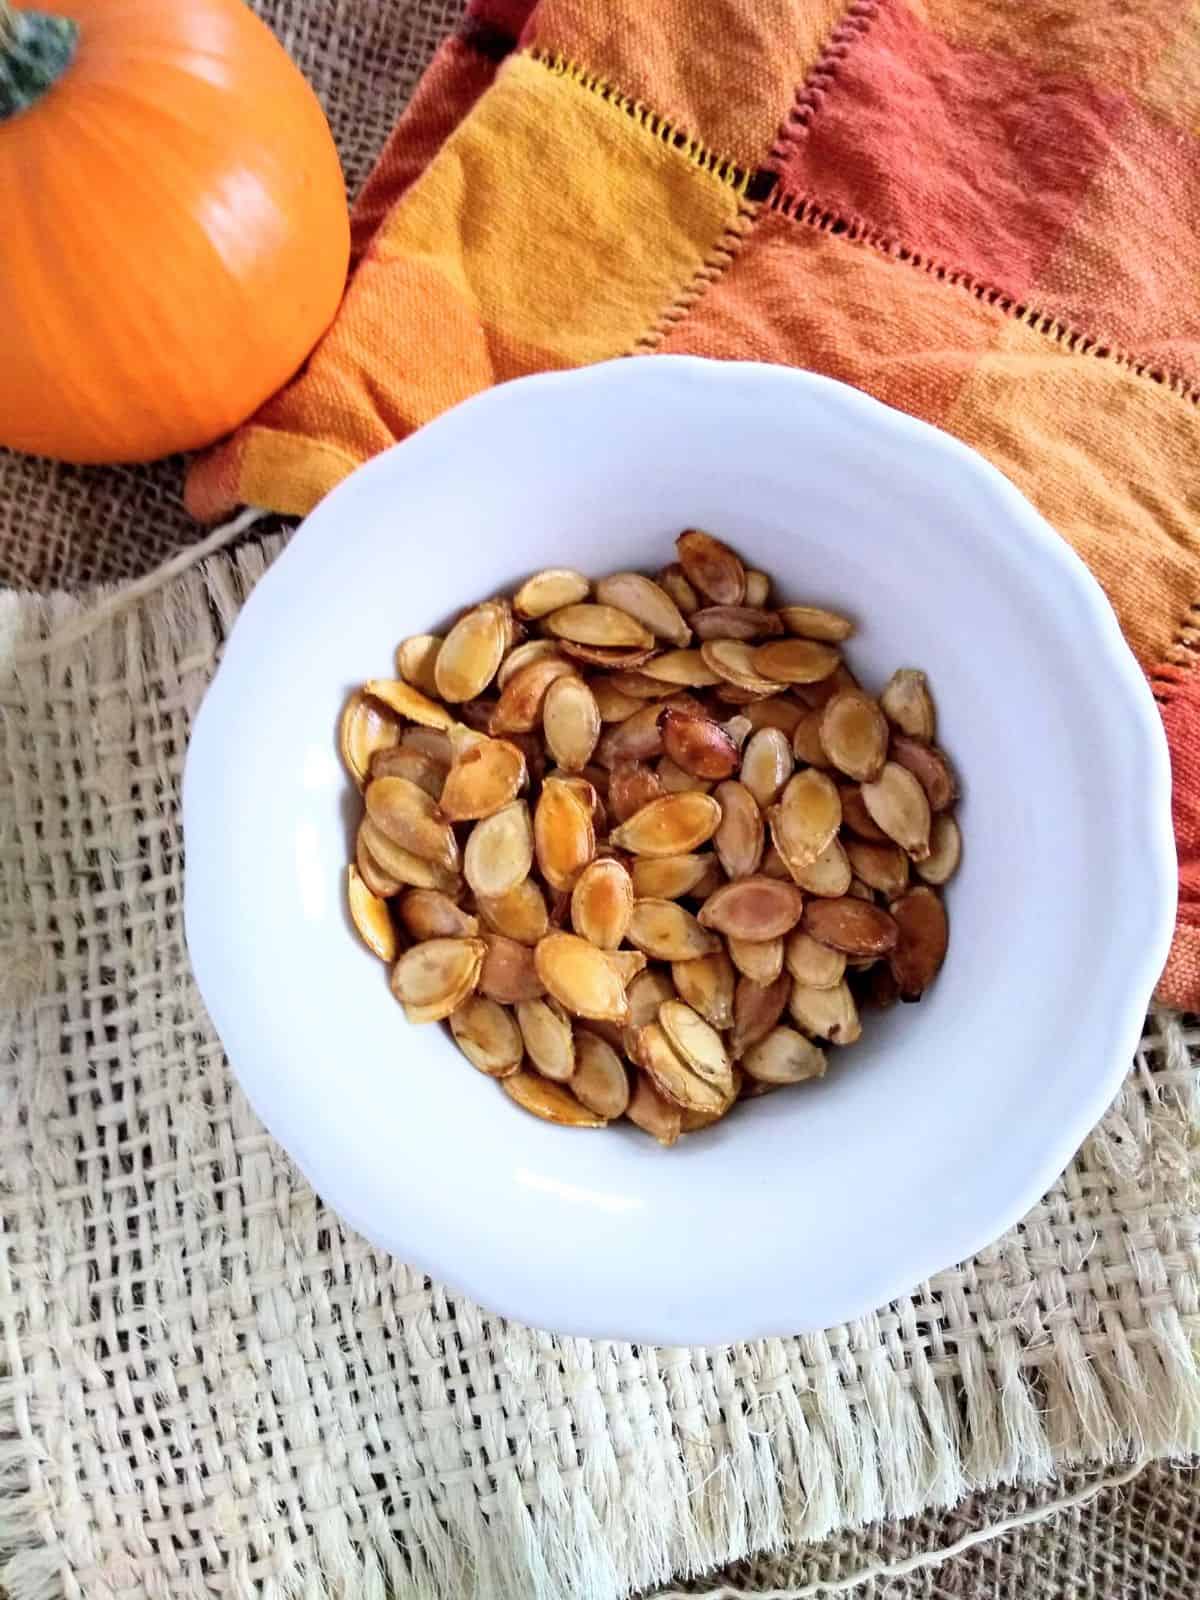 Pie pumpkin seeds that have been roasted sitting in a white bowl with a orange plaid towel underneath.